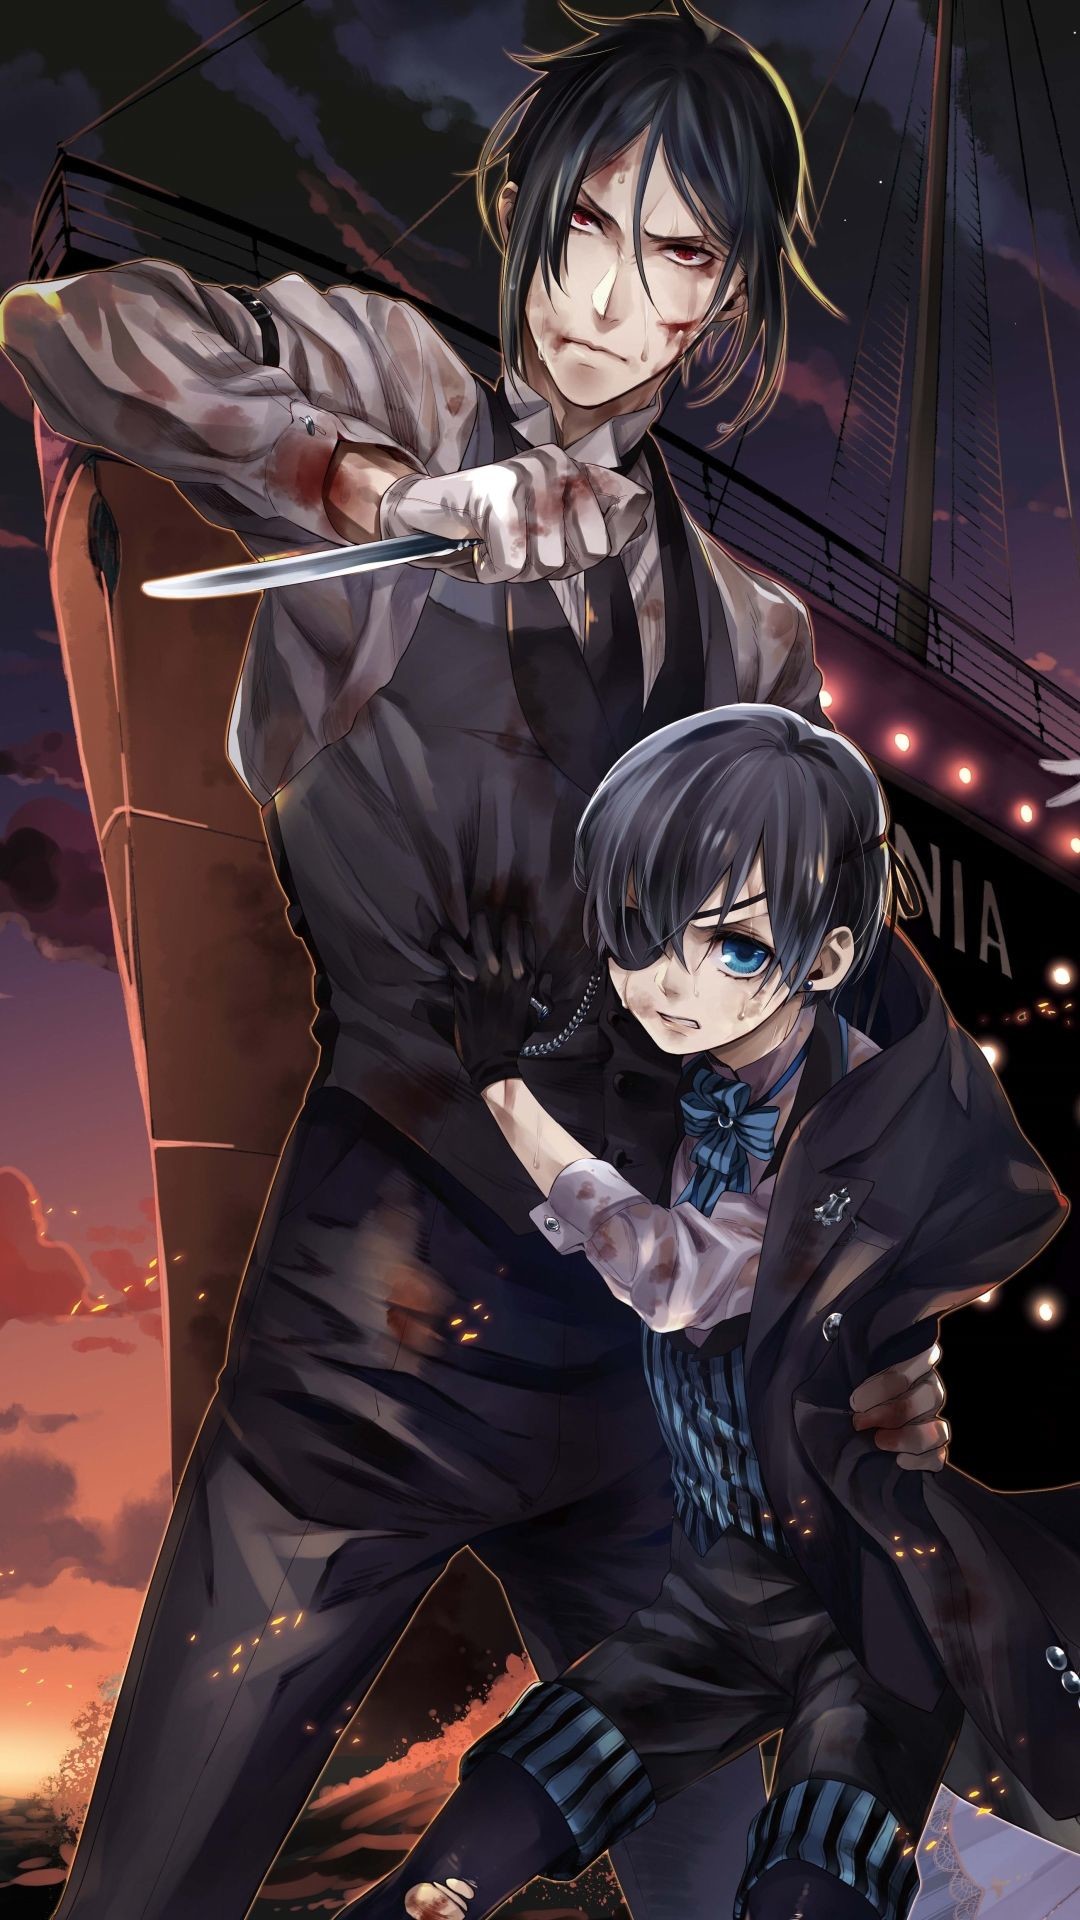 1080x1920 1920x1200 Black Butler Wallpapers and Background Images - stmed.net.  1920x1200 Black Butler Wallpapers ...